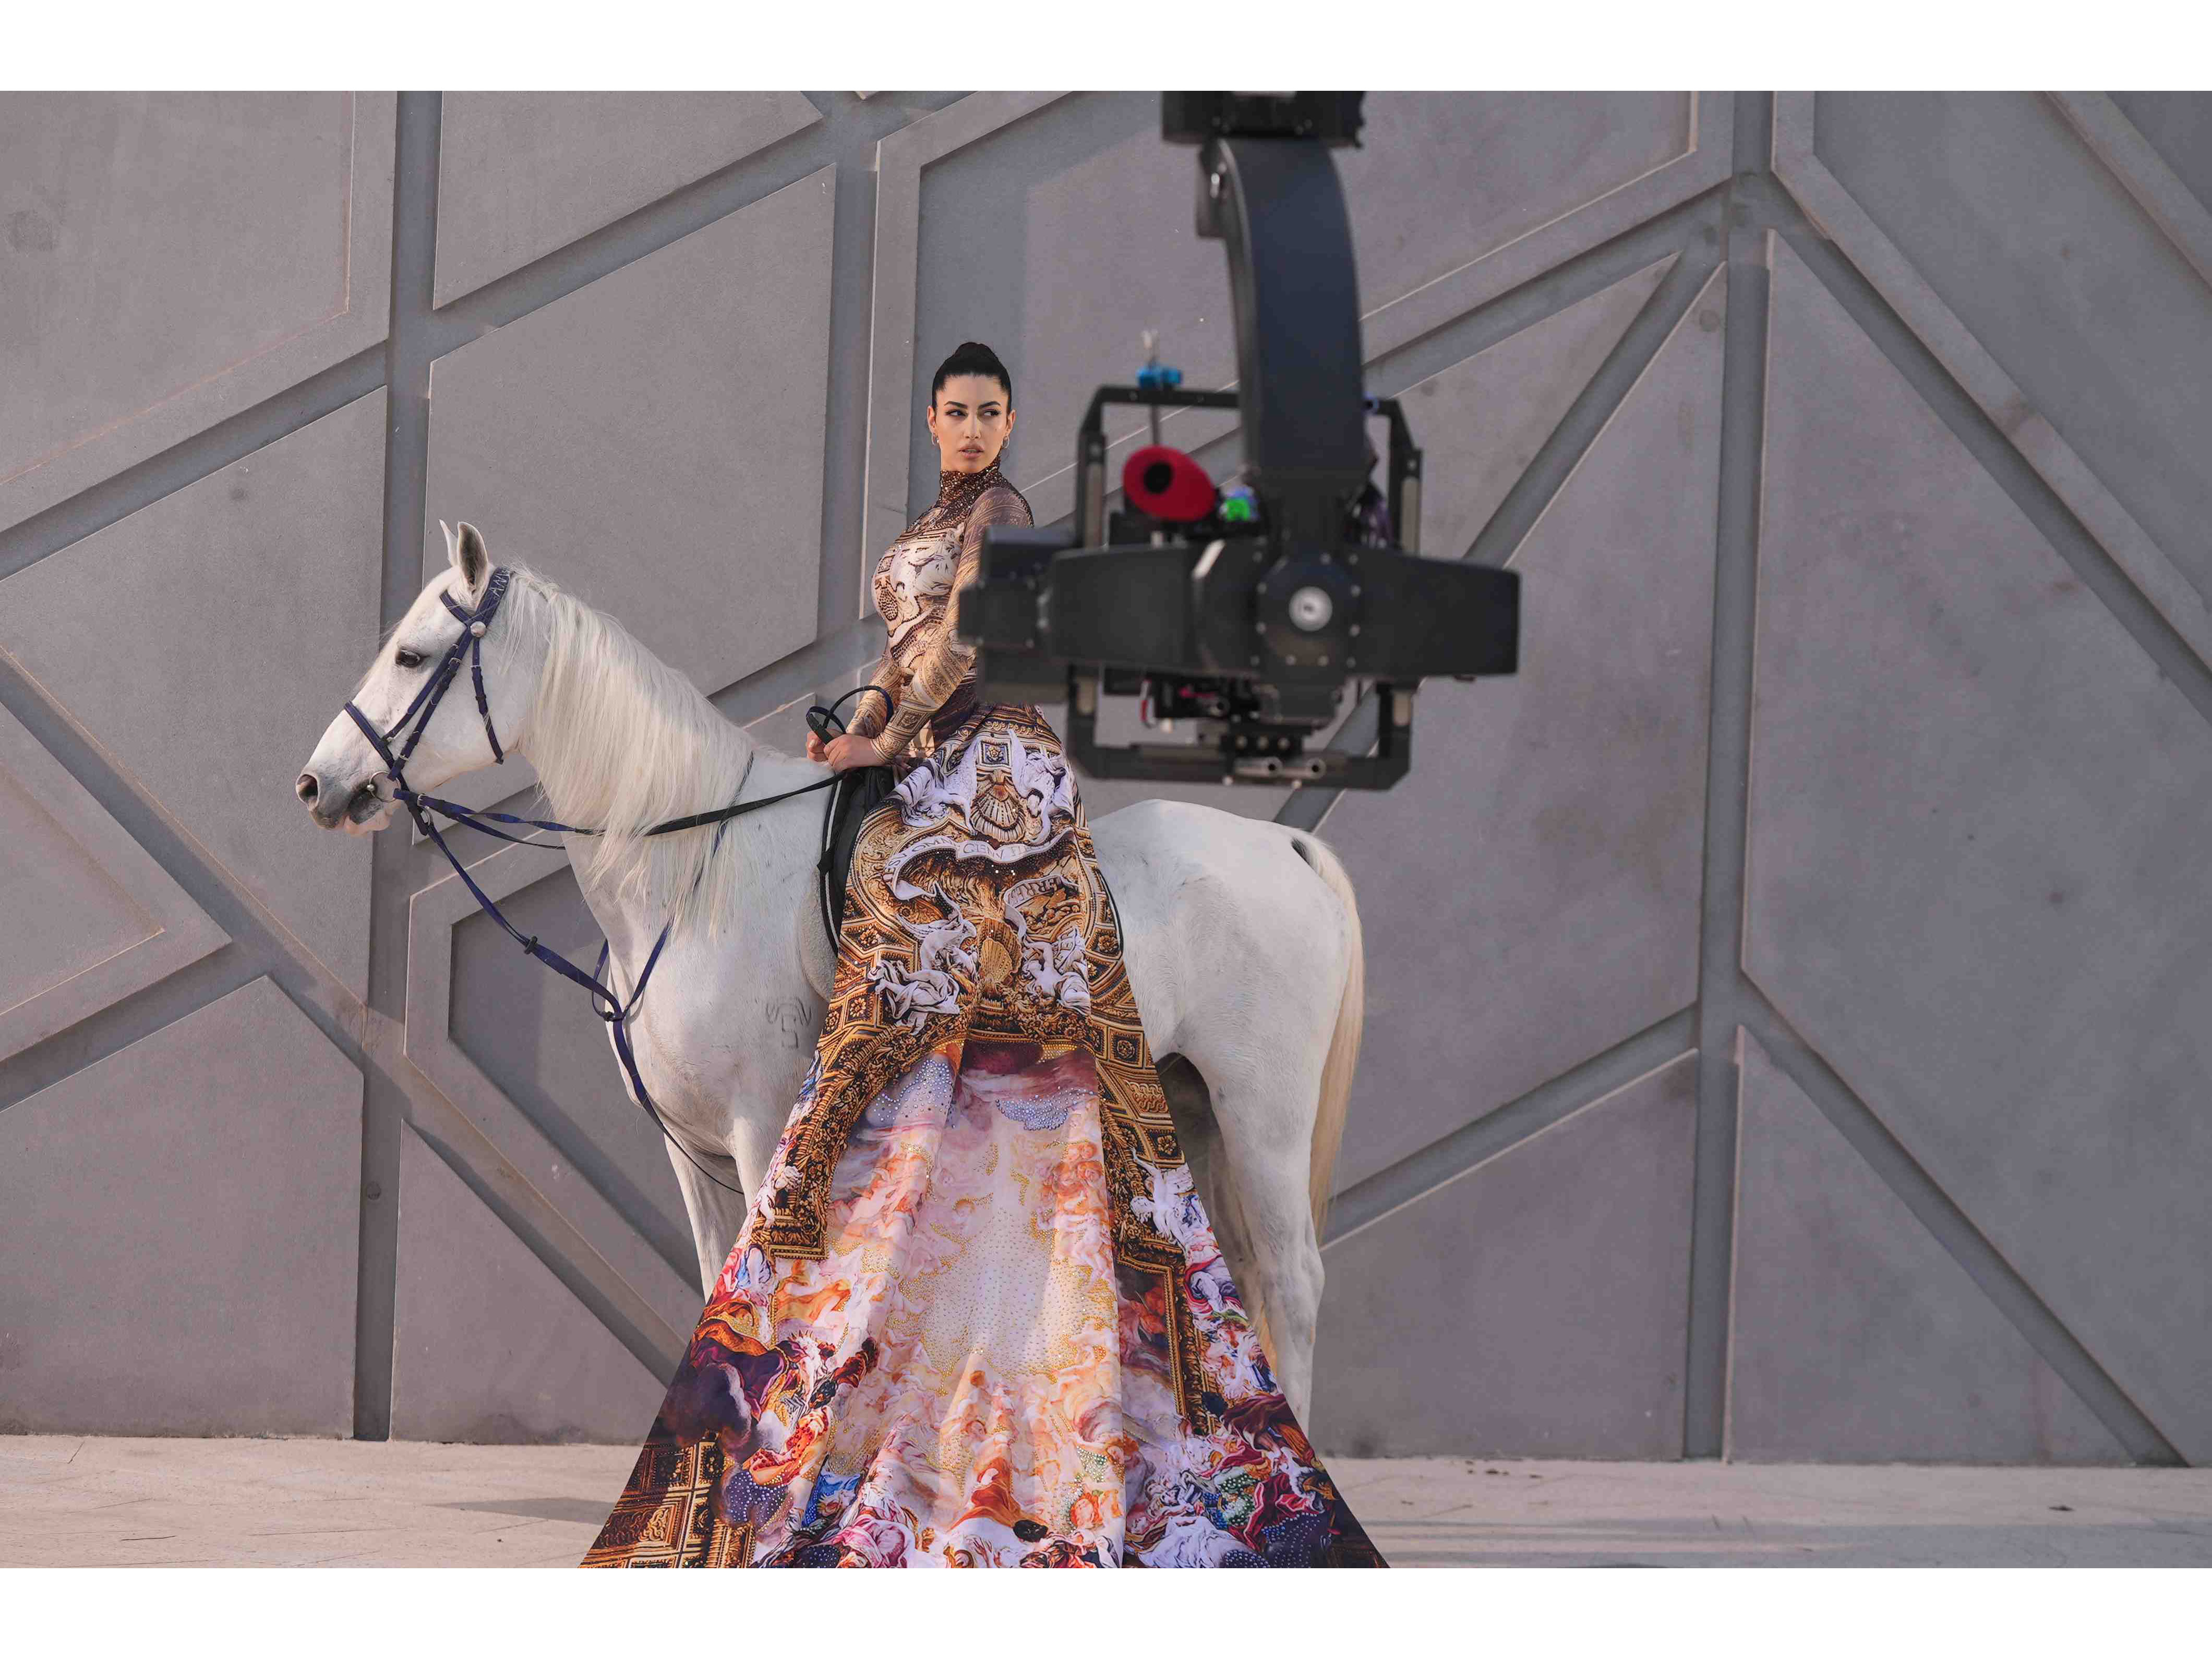 High fashion meets automotive in alluring Honda launch commercial backed by a.k.a. Media